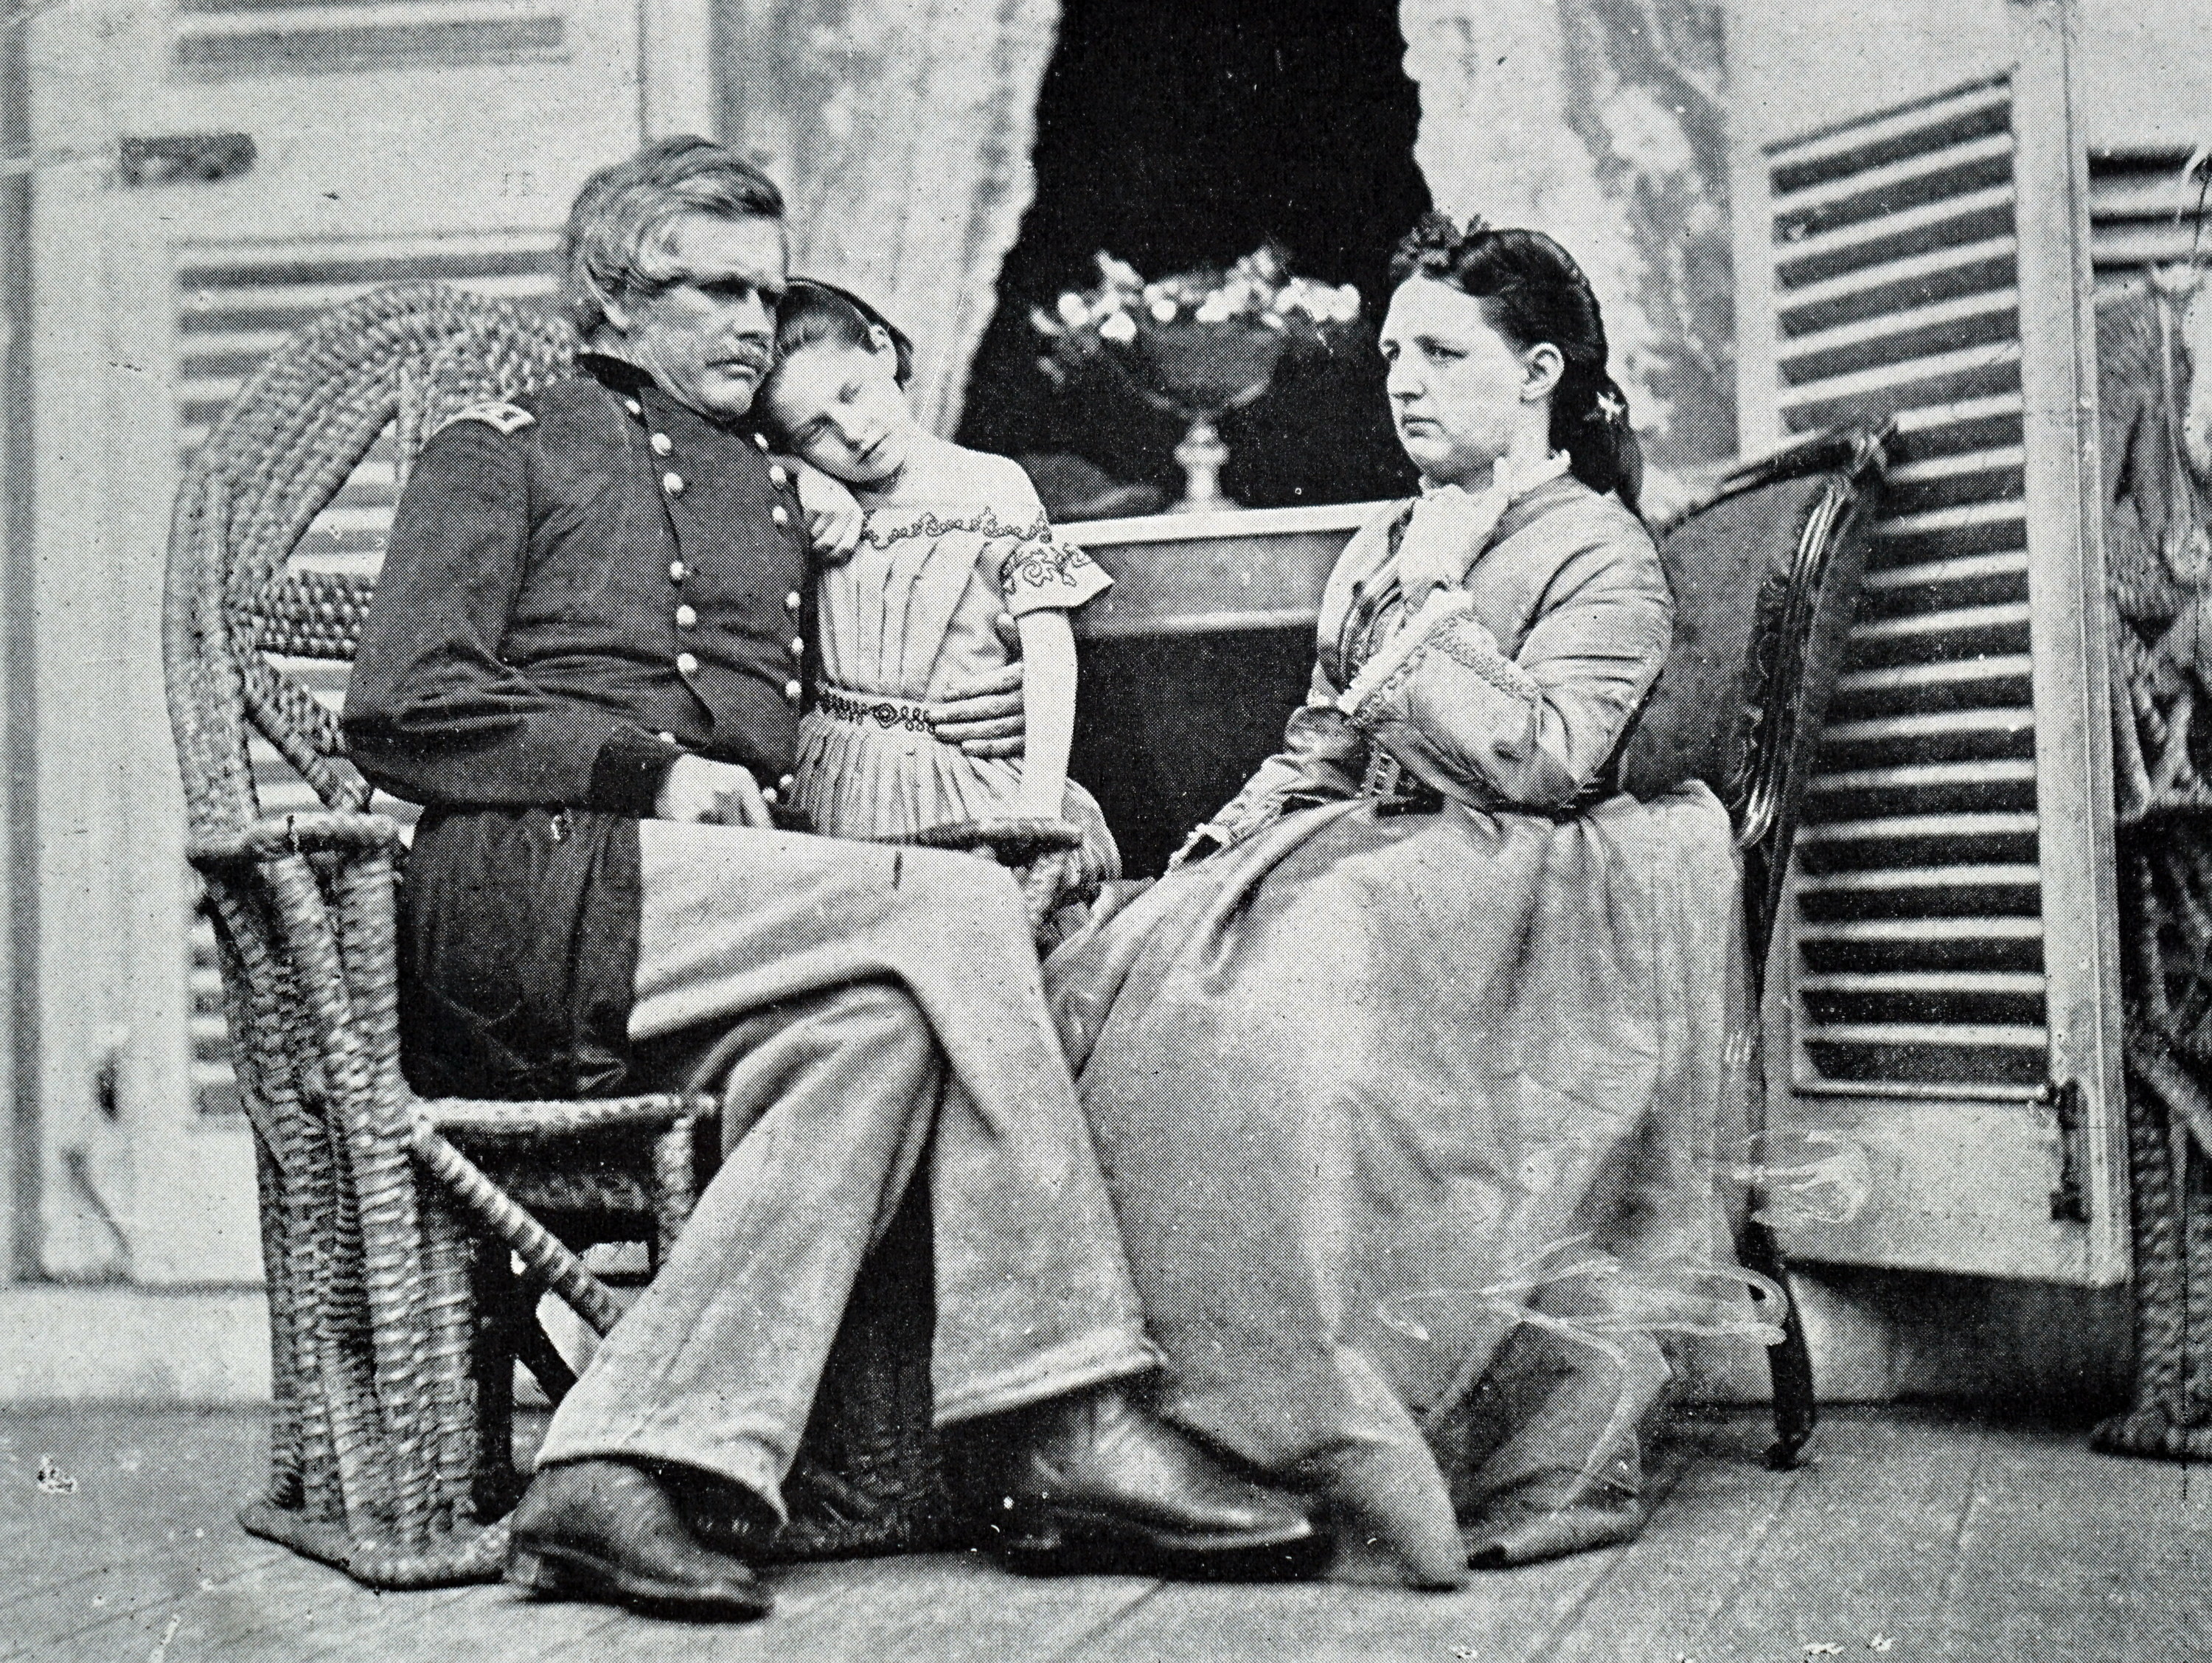 A civil war officer with his family